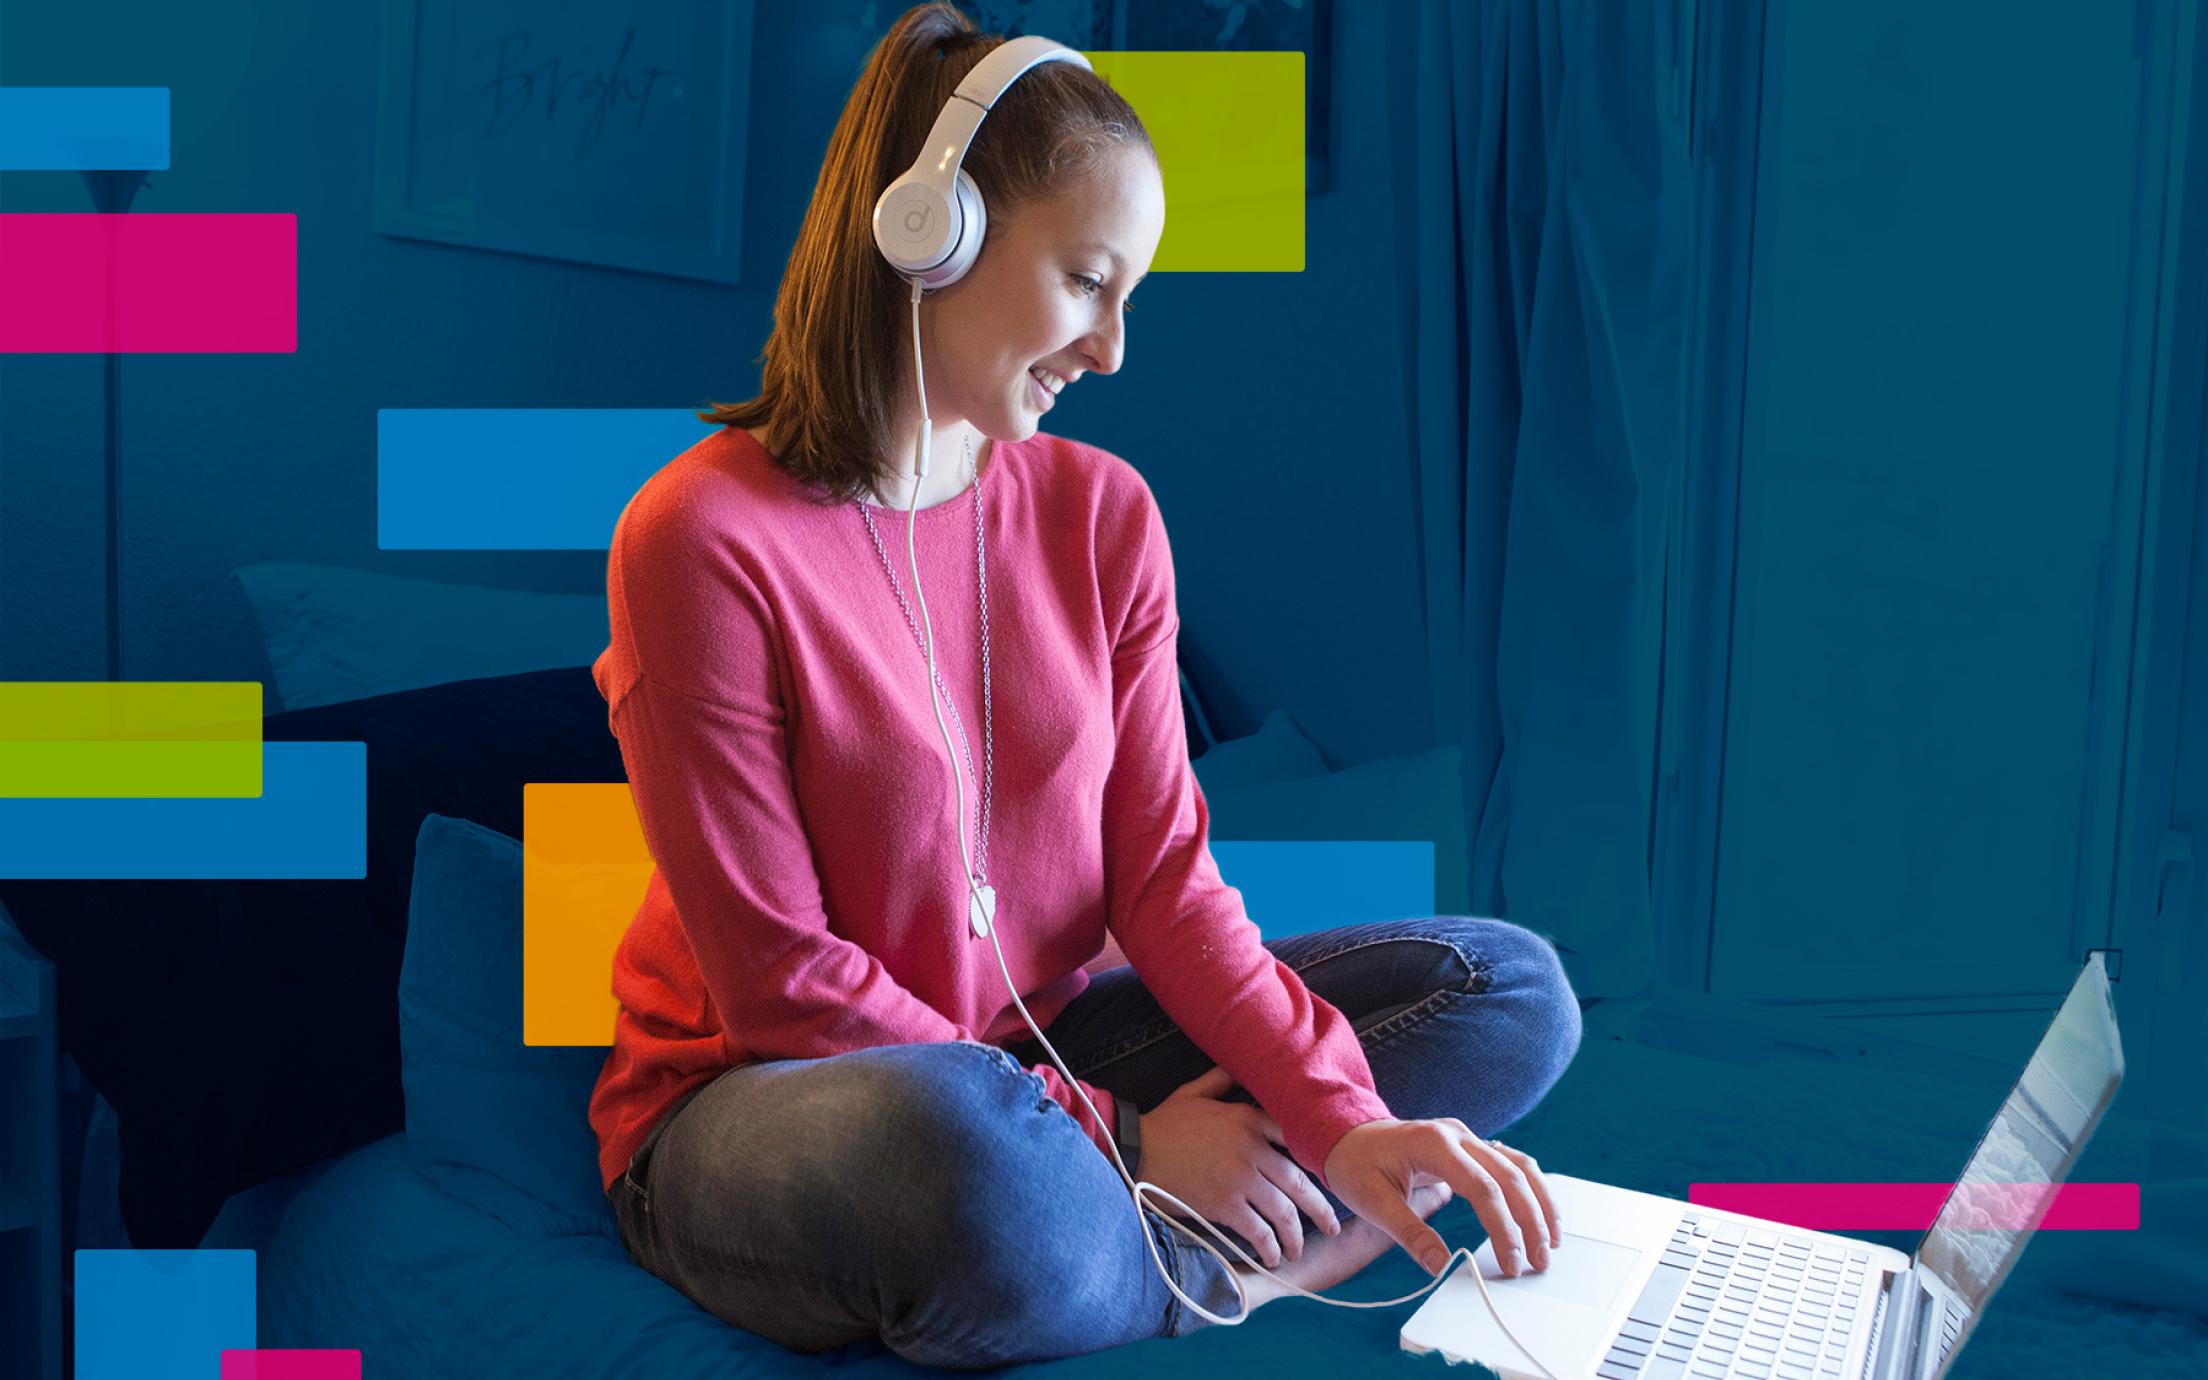 Girl with headphones on looking at a computer